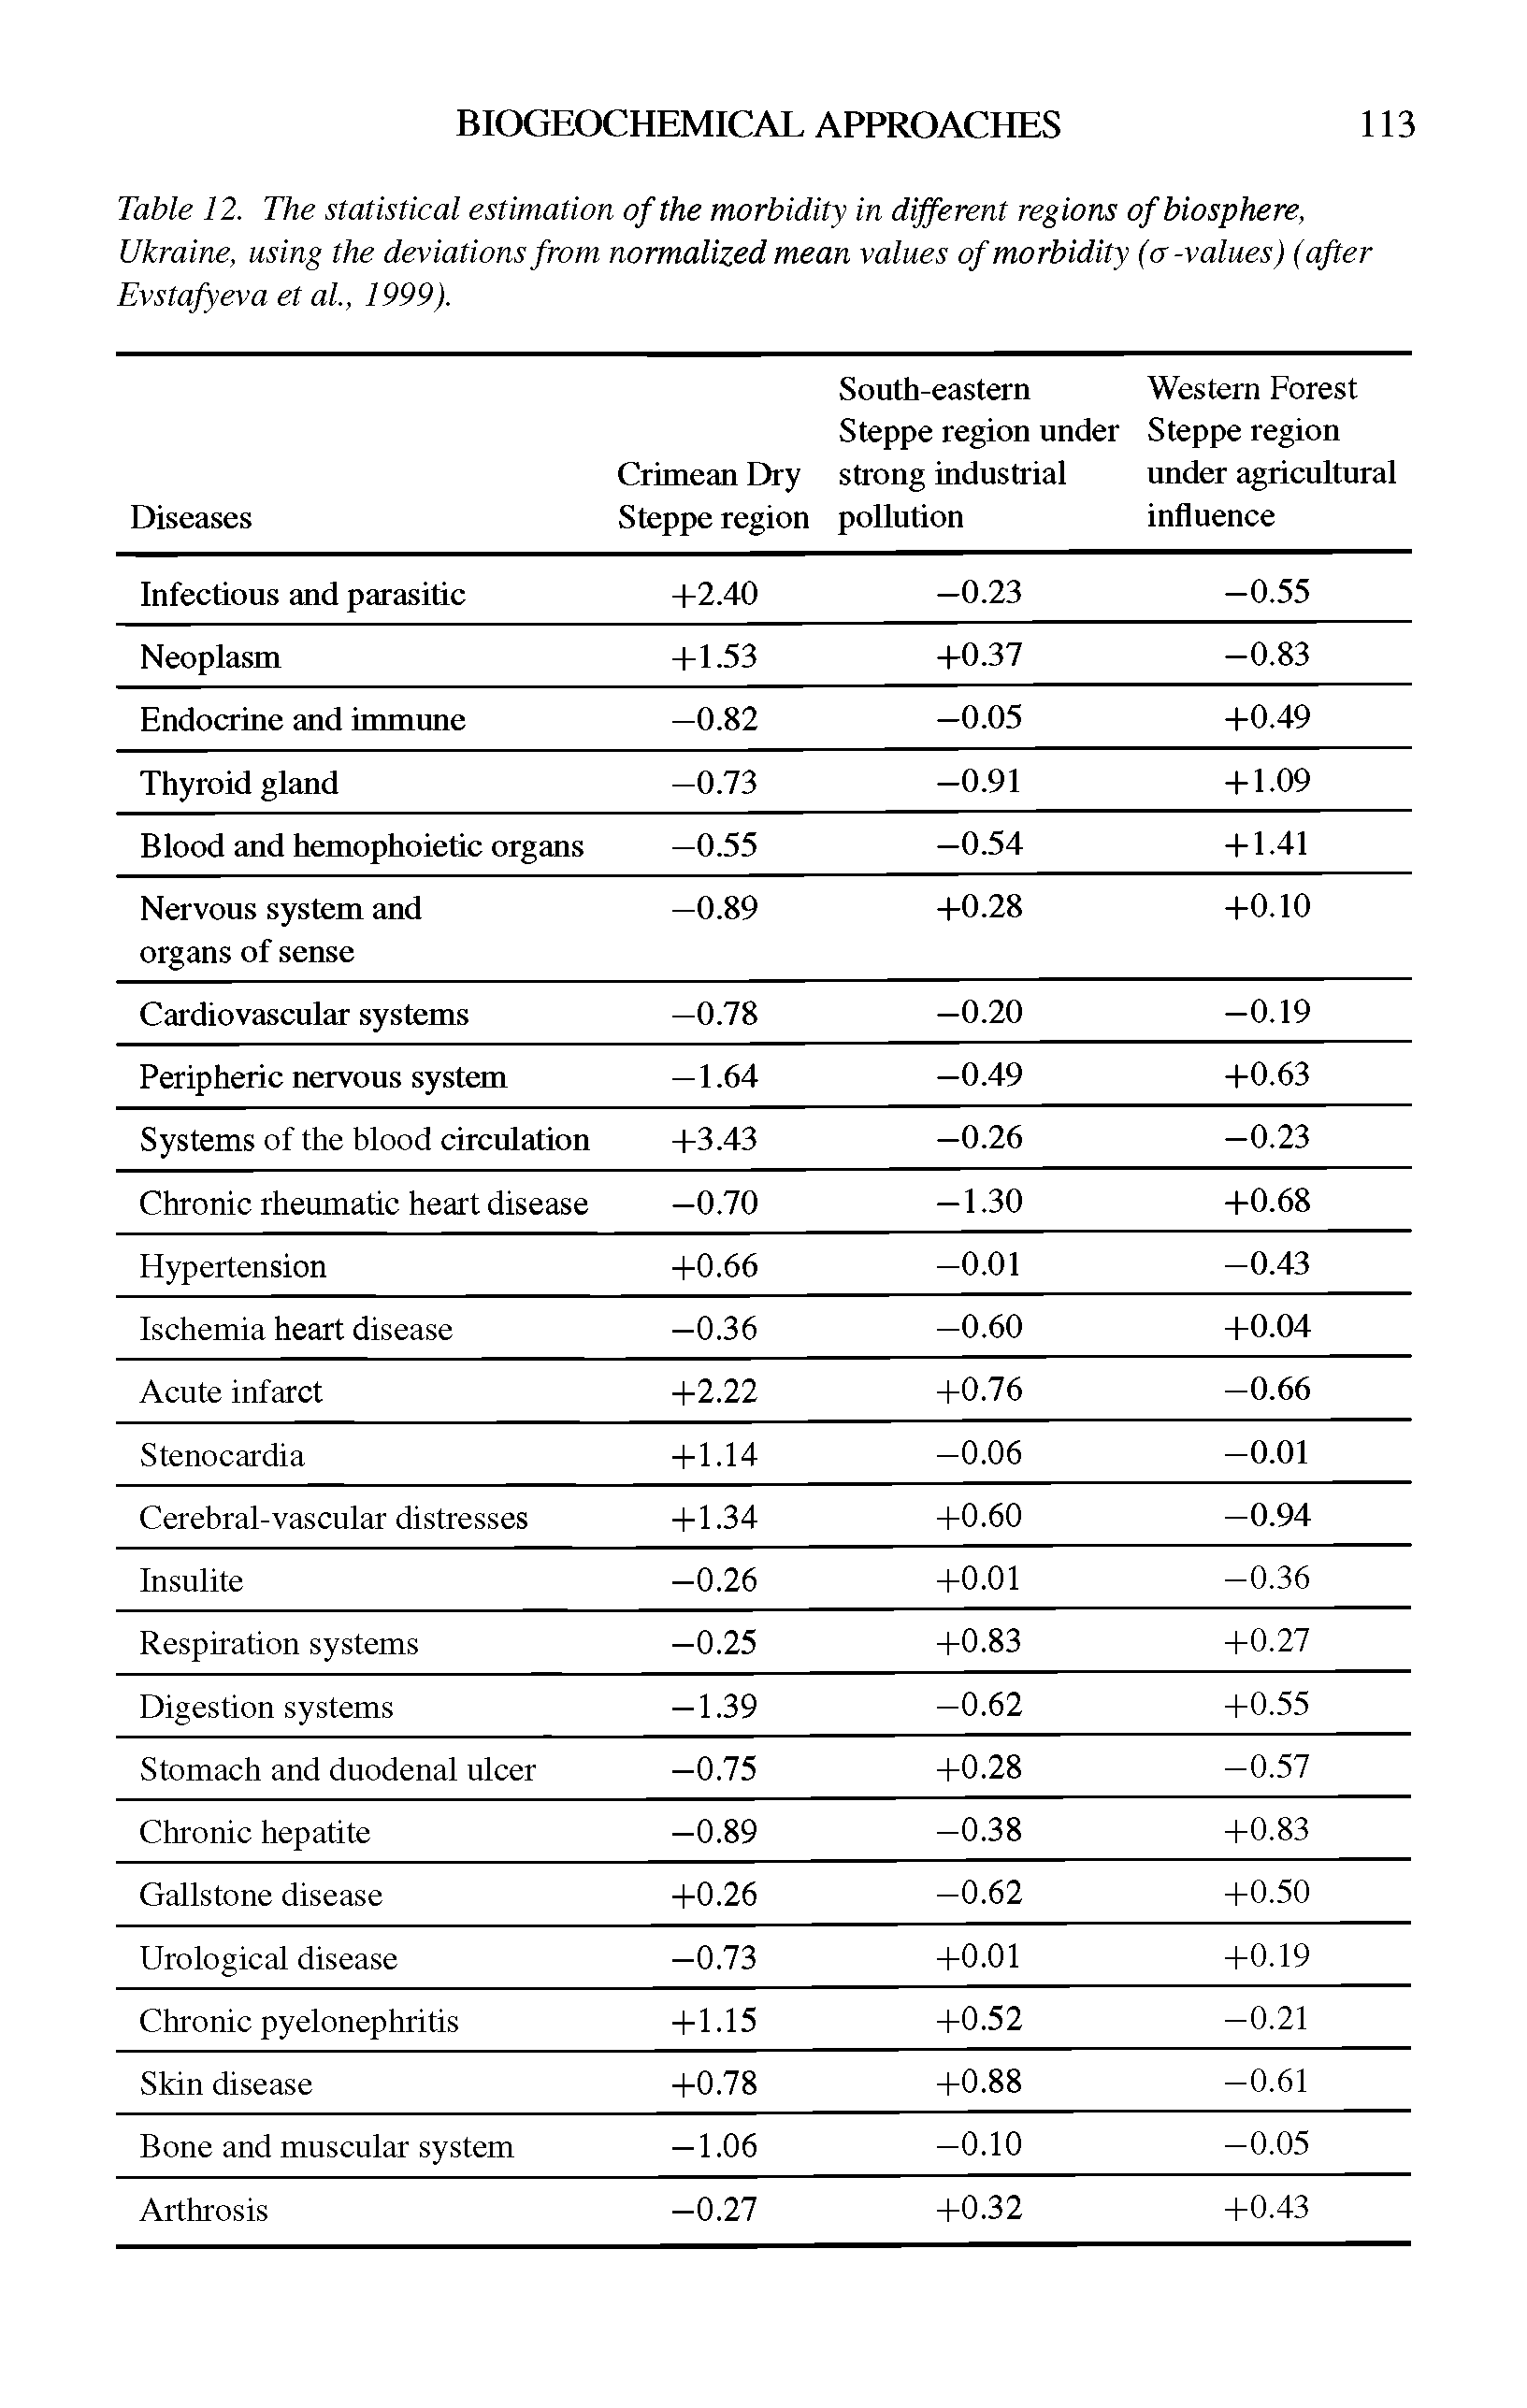 Table 12. The statistical estimation of the morbidity in different regions of biosphere, Ukraine, using the deviations from normalized mean values of morbidity (cr-values) (after Evstafyeva et al., 1999).